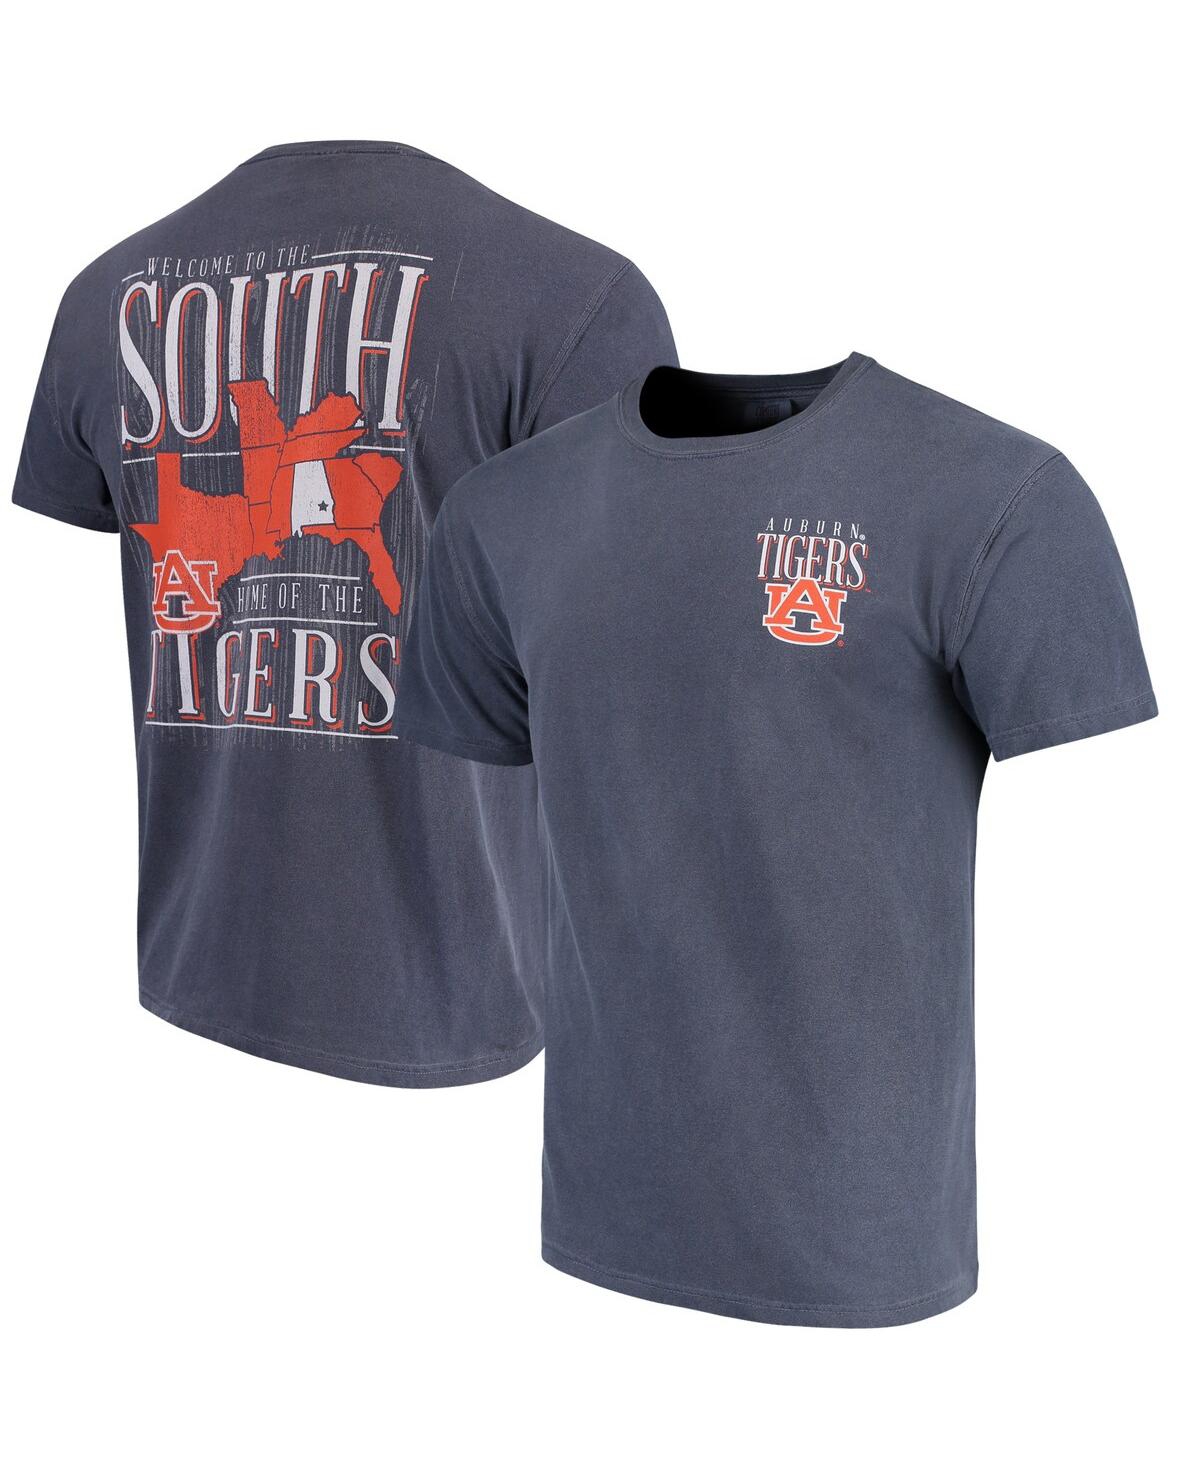 Men's Navy Auburn Tigers Welcome to the South Comfort Colors T-shirt - Navy